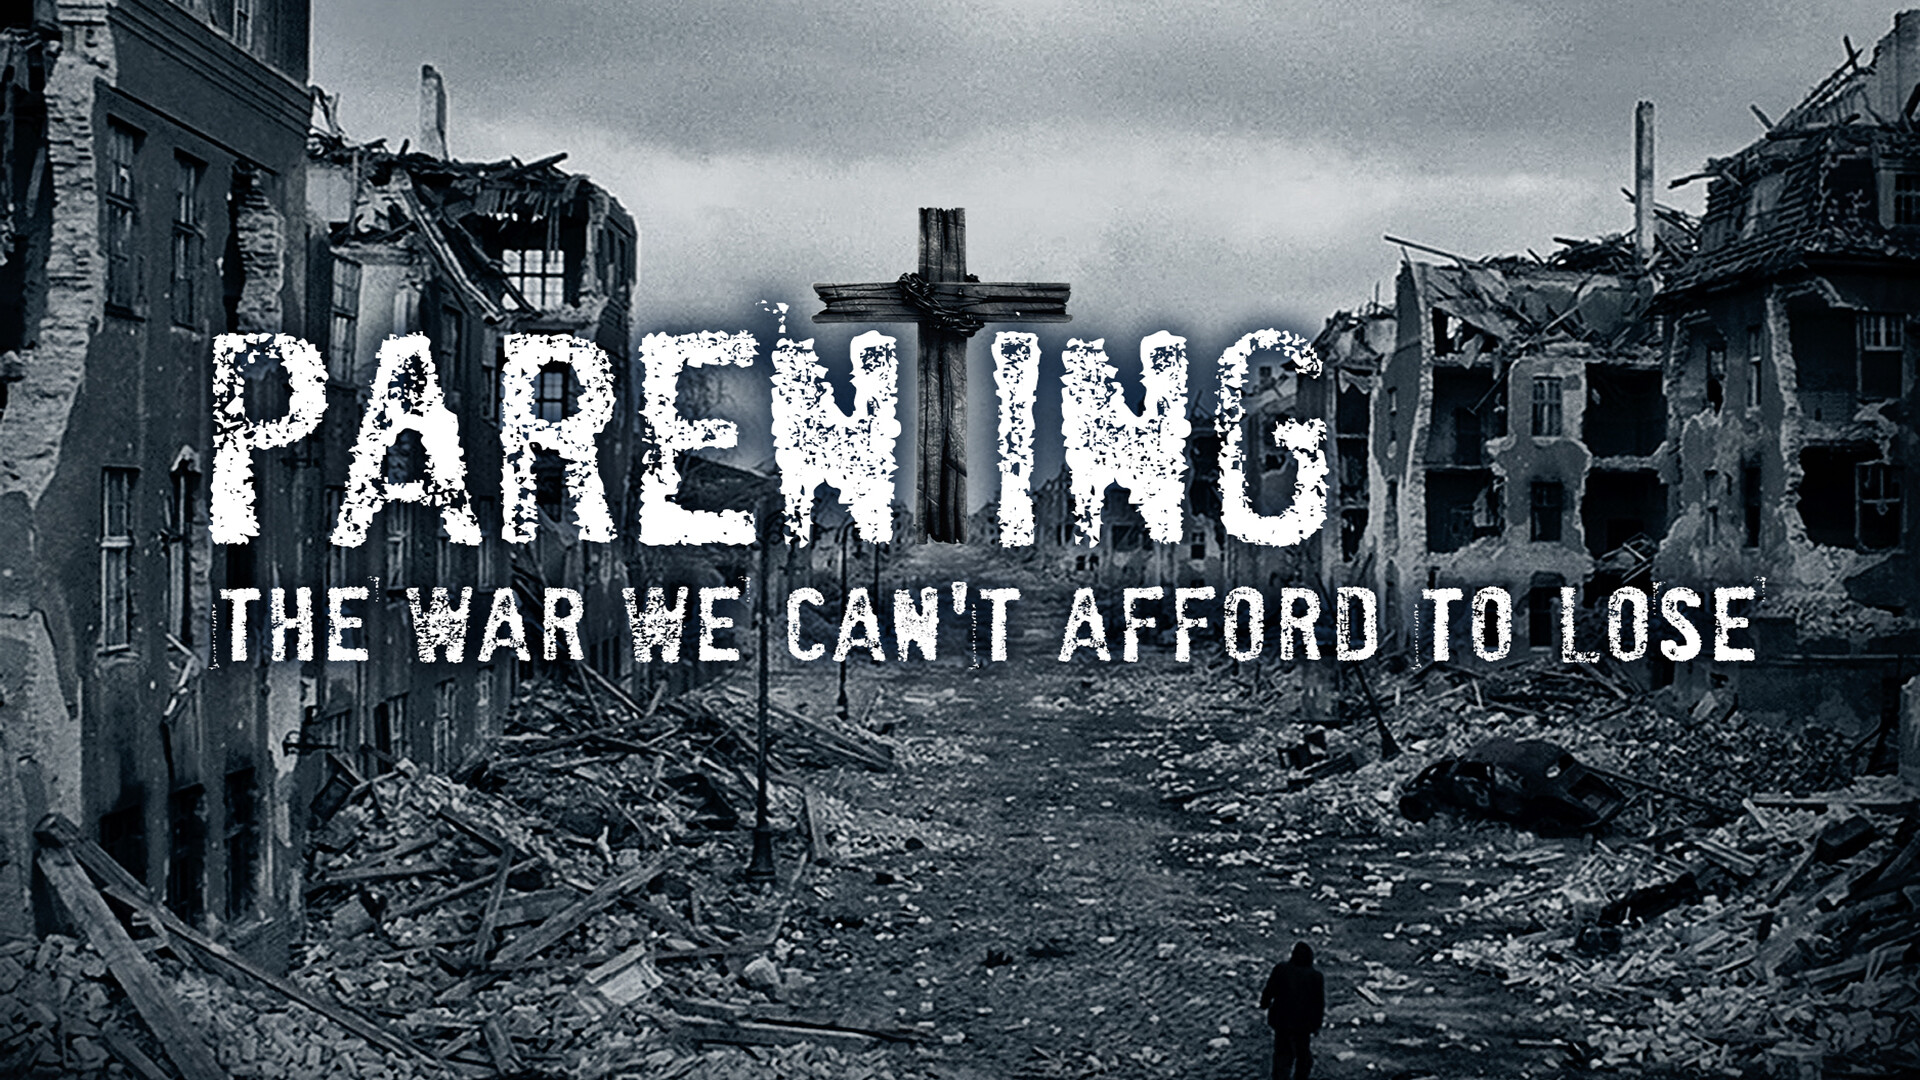 Parenting: The War We Can't Afford to Lose